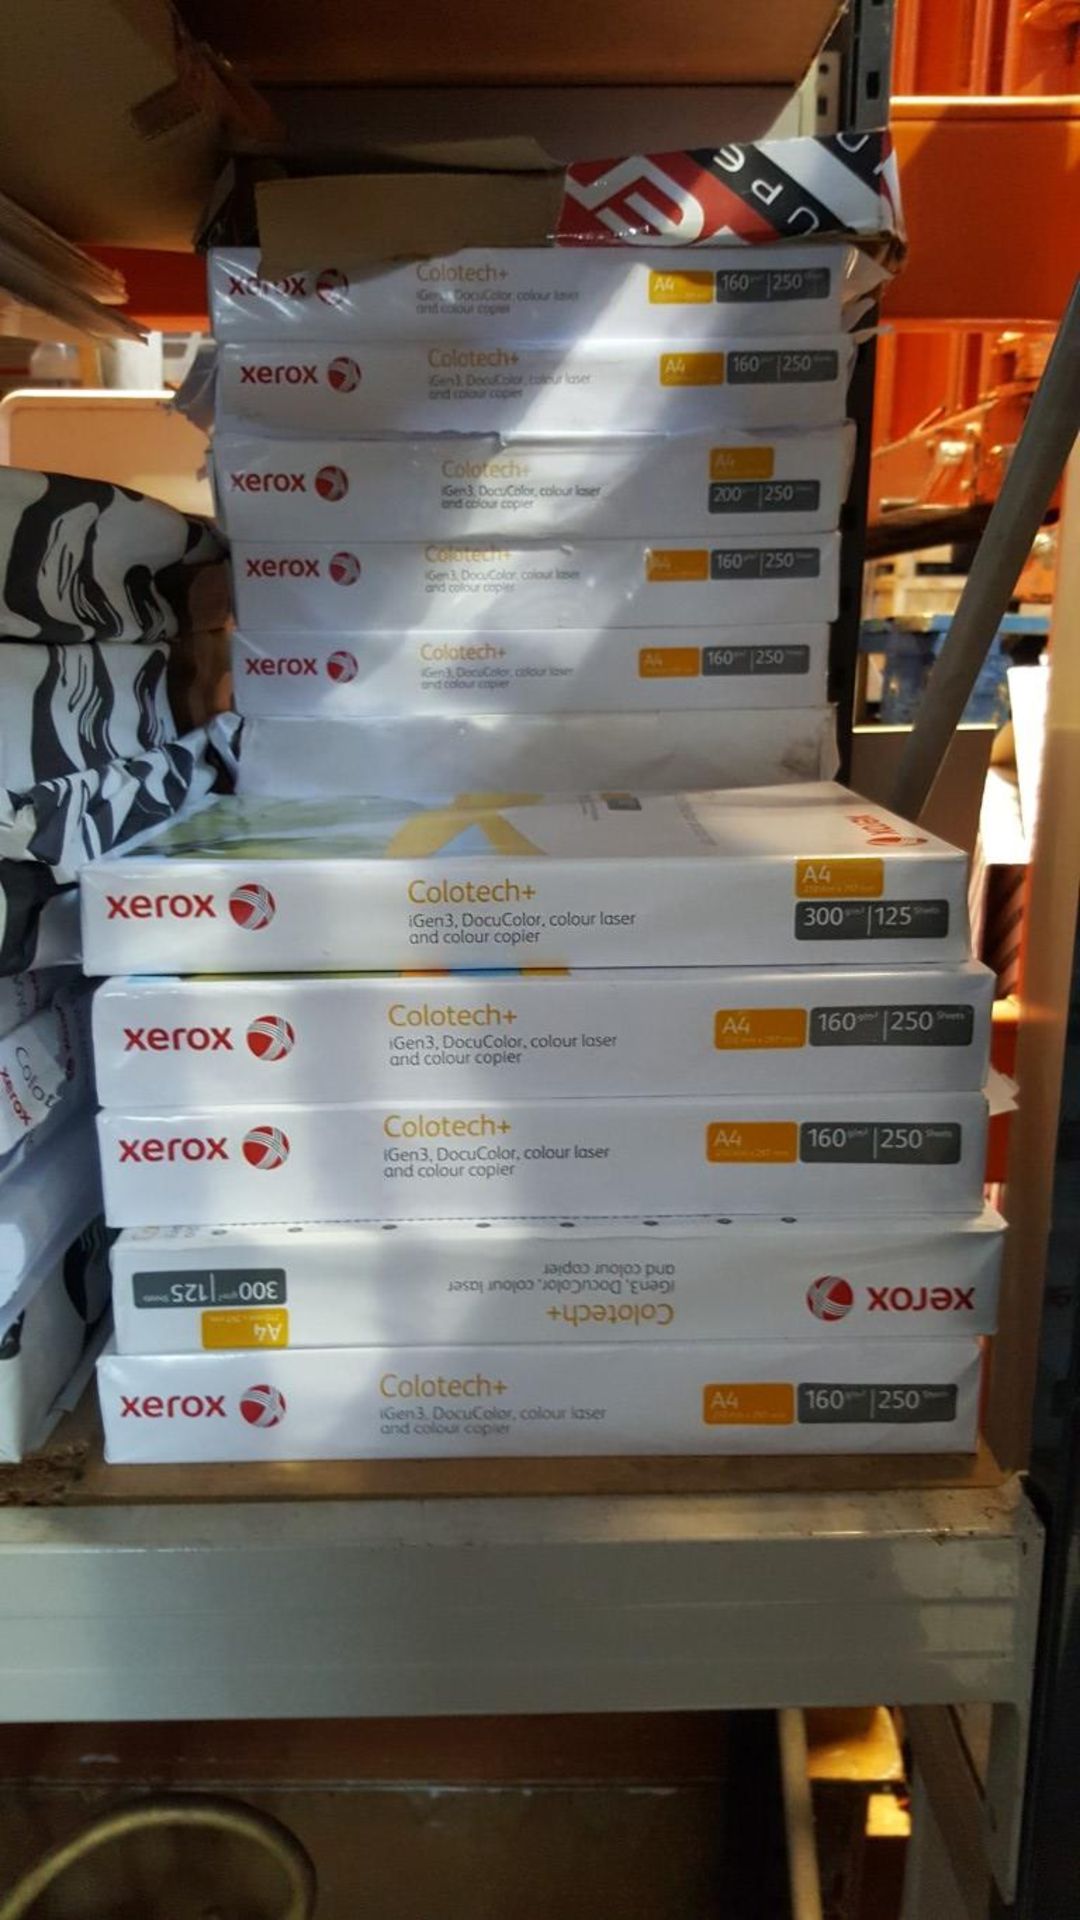 1 x Joblot Of Various Packs Of Paper (35+ Packs) - CL011 - Location: Altrincham WA14 - REF: Ref709 - Image 2 of 10